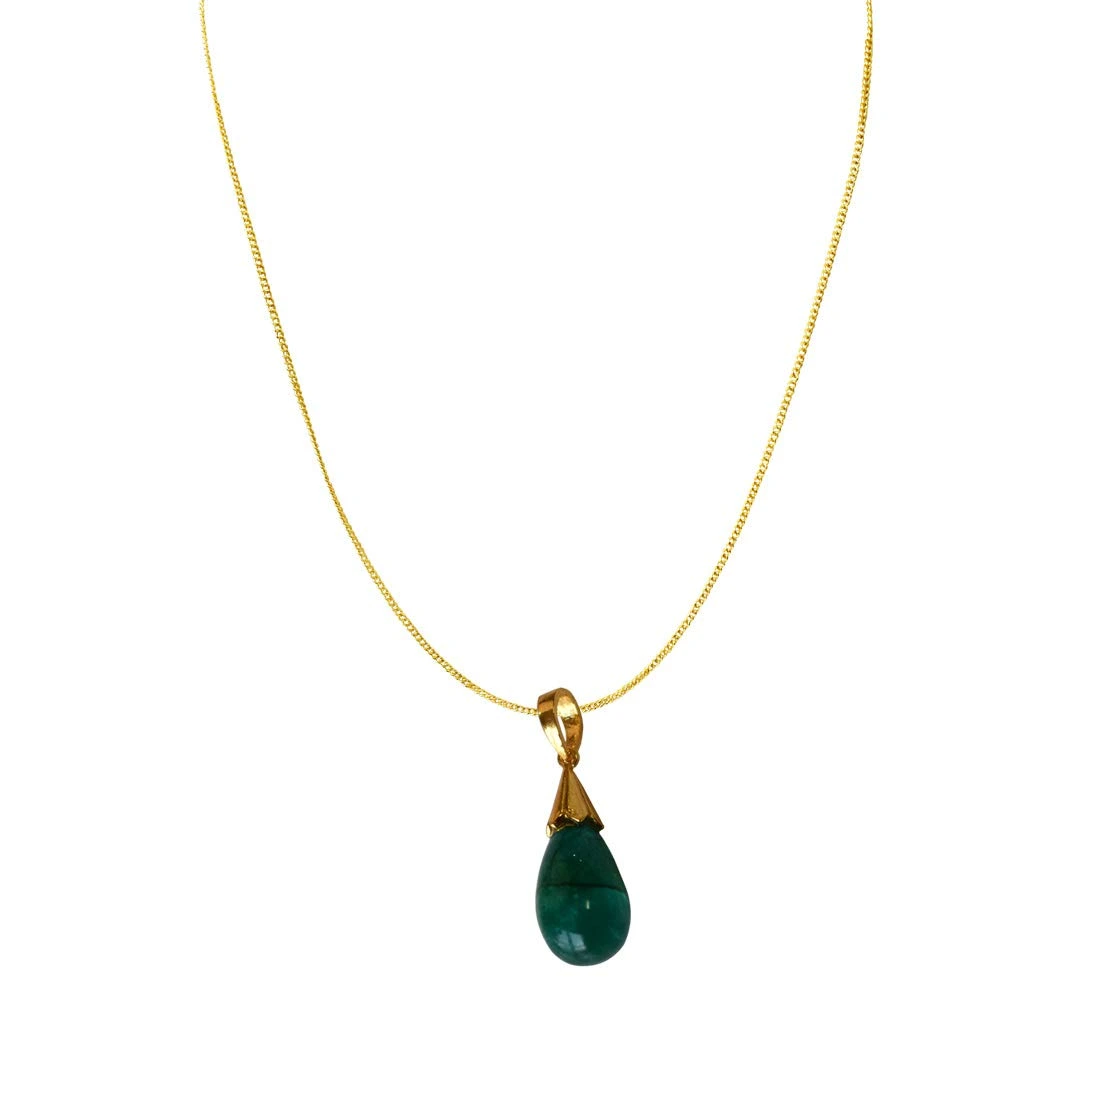 19.30 cts Real Drop Green Onyx Sterling Silver Pendant with Gold Finished Chain for Women (SDS319-19.38cts)